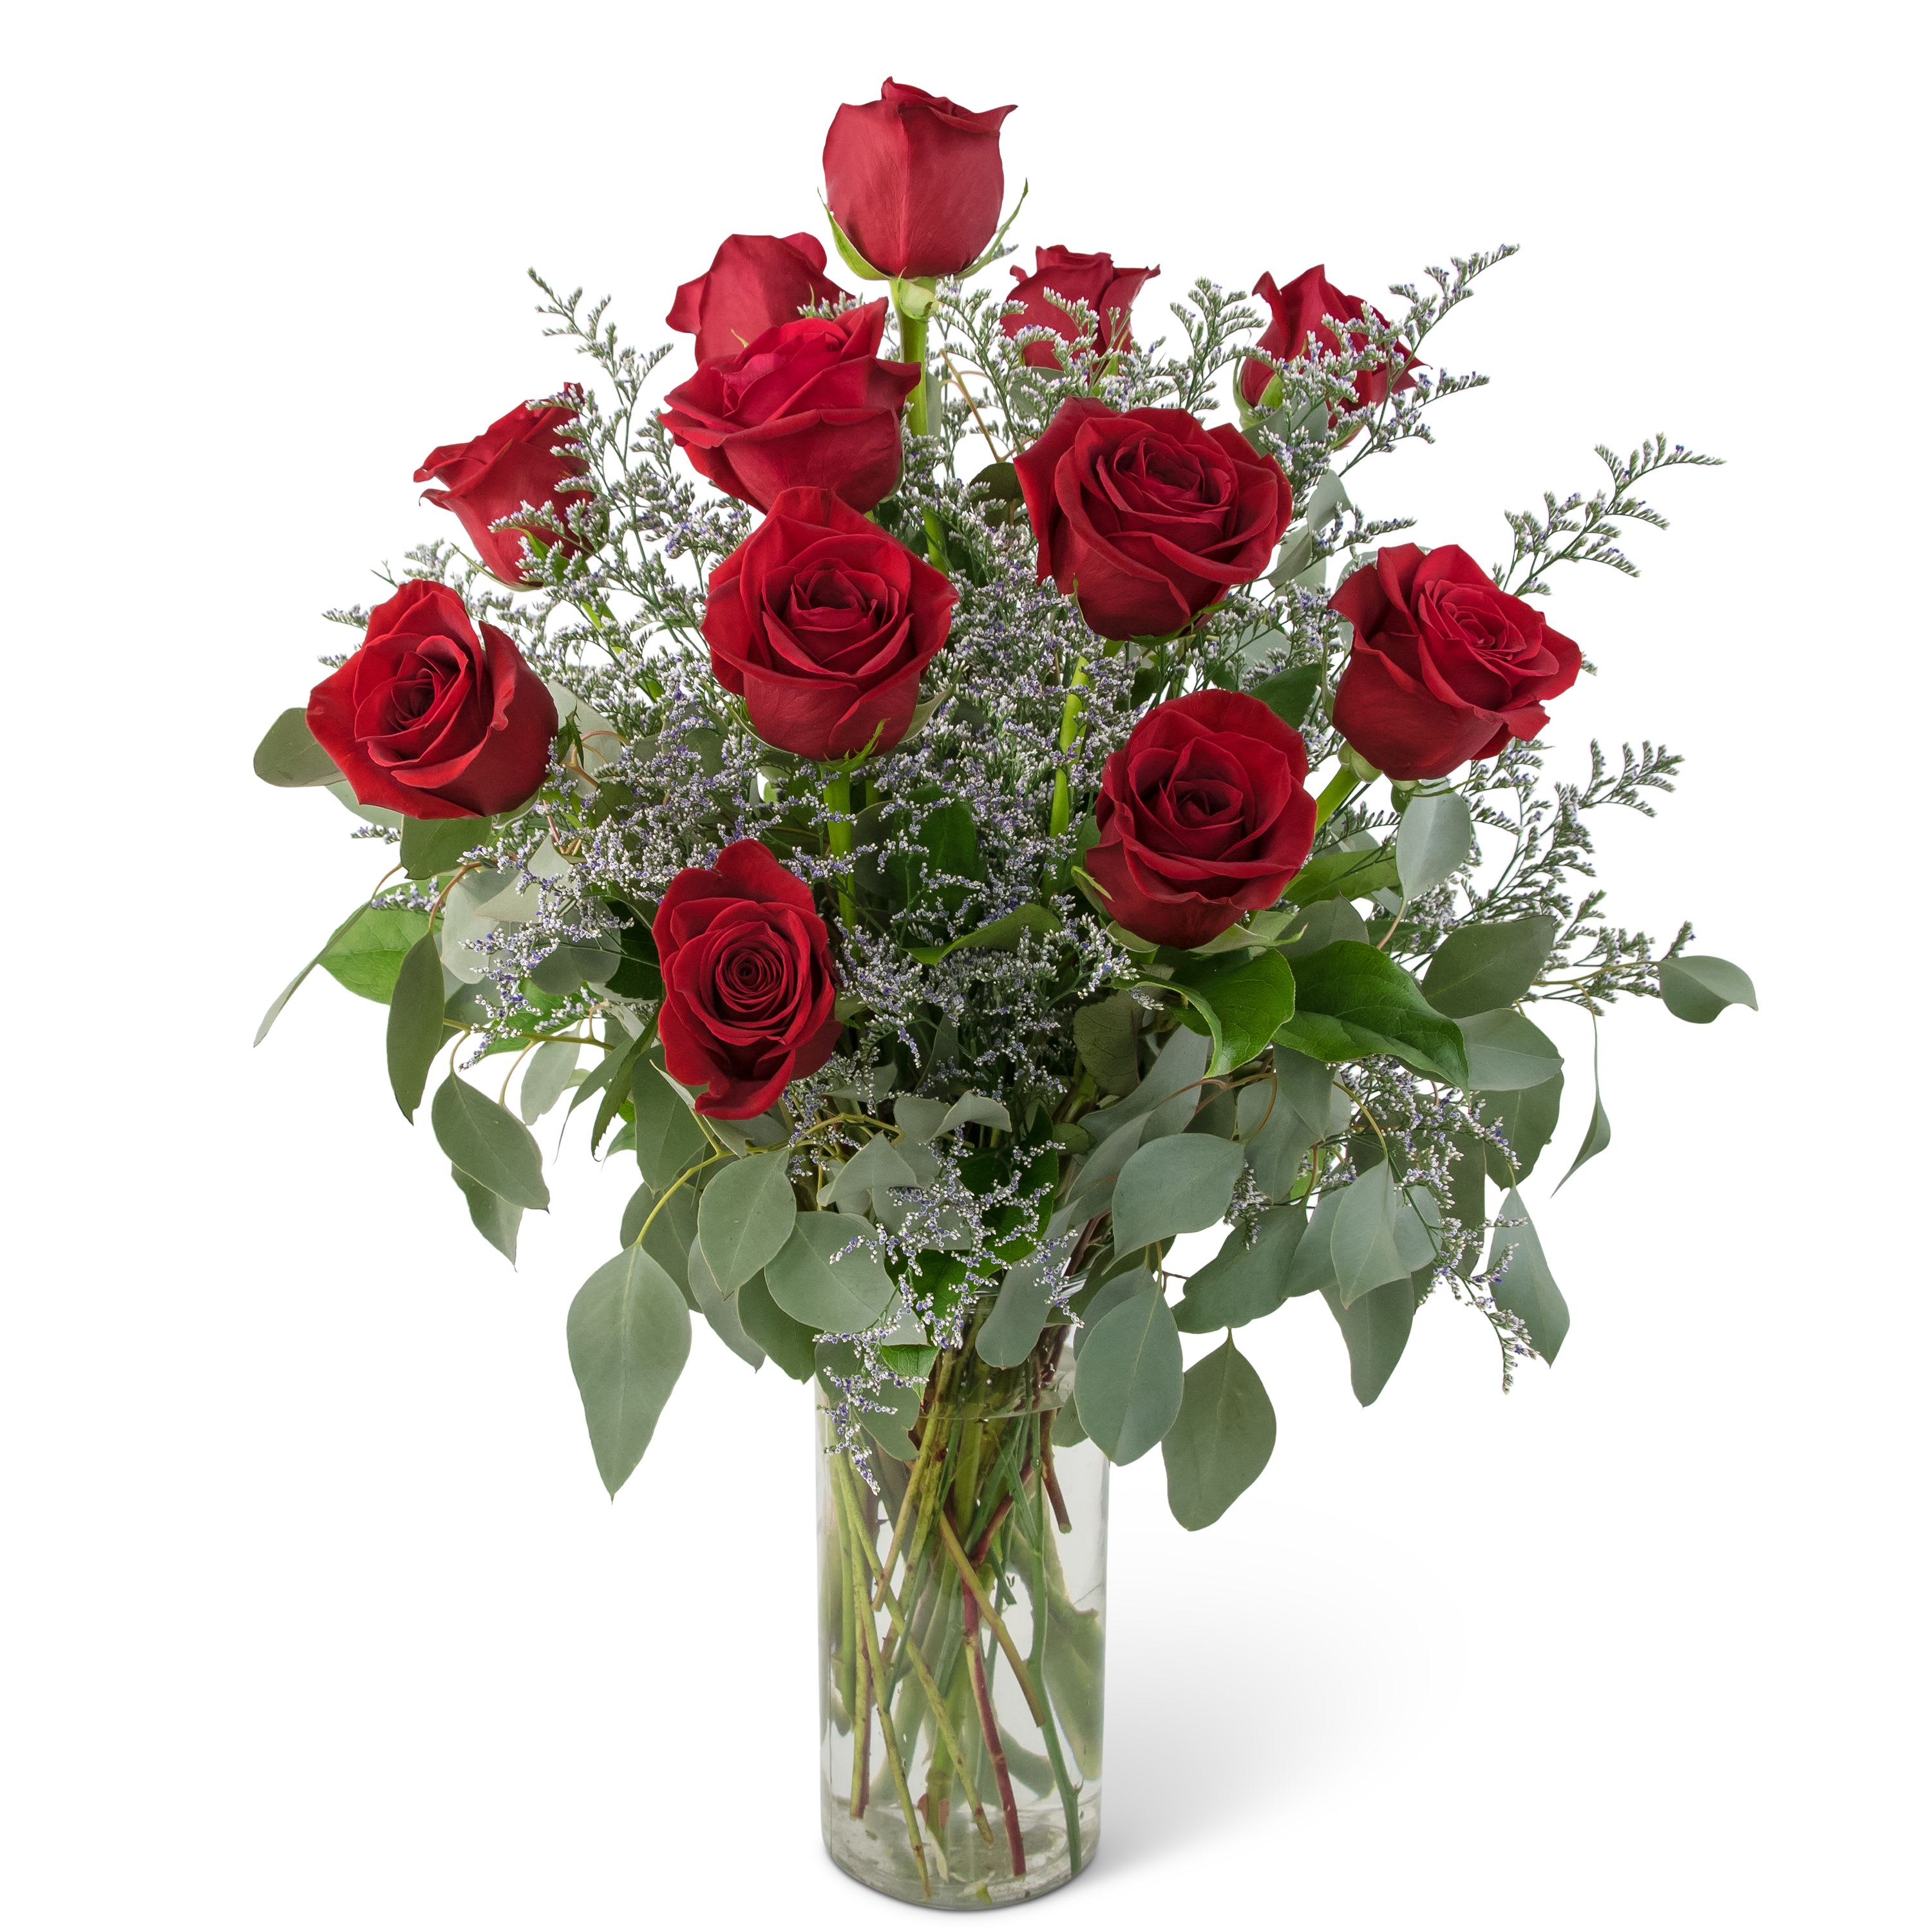 Elegance and Grace Dozen Roses - TMF-274 - When you want to impress you always send the best. One dozen of our finest long stem red roses and premium greenery fill this larger than life bouquet. This floral gift simply expresses Elegance and Grace. Approximately 25&quot; H x 16&quot; W